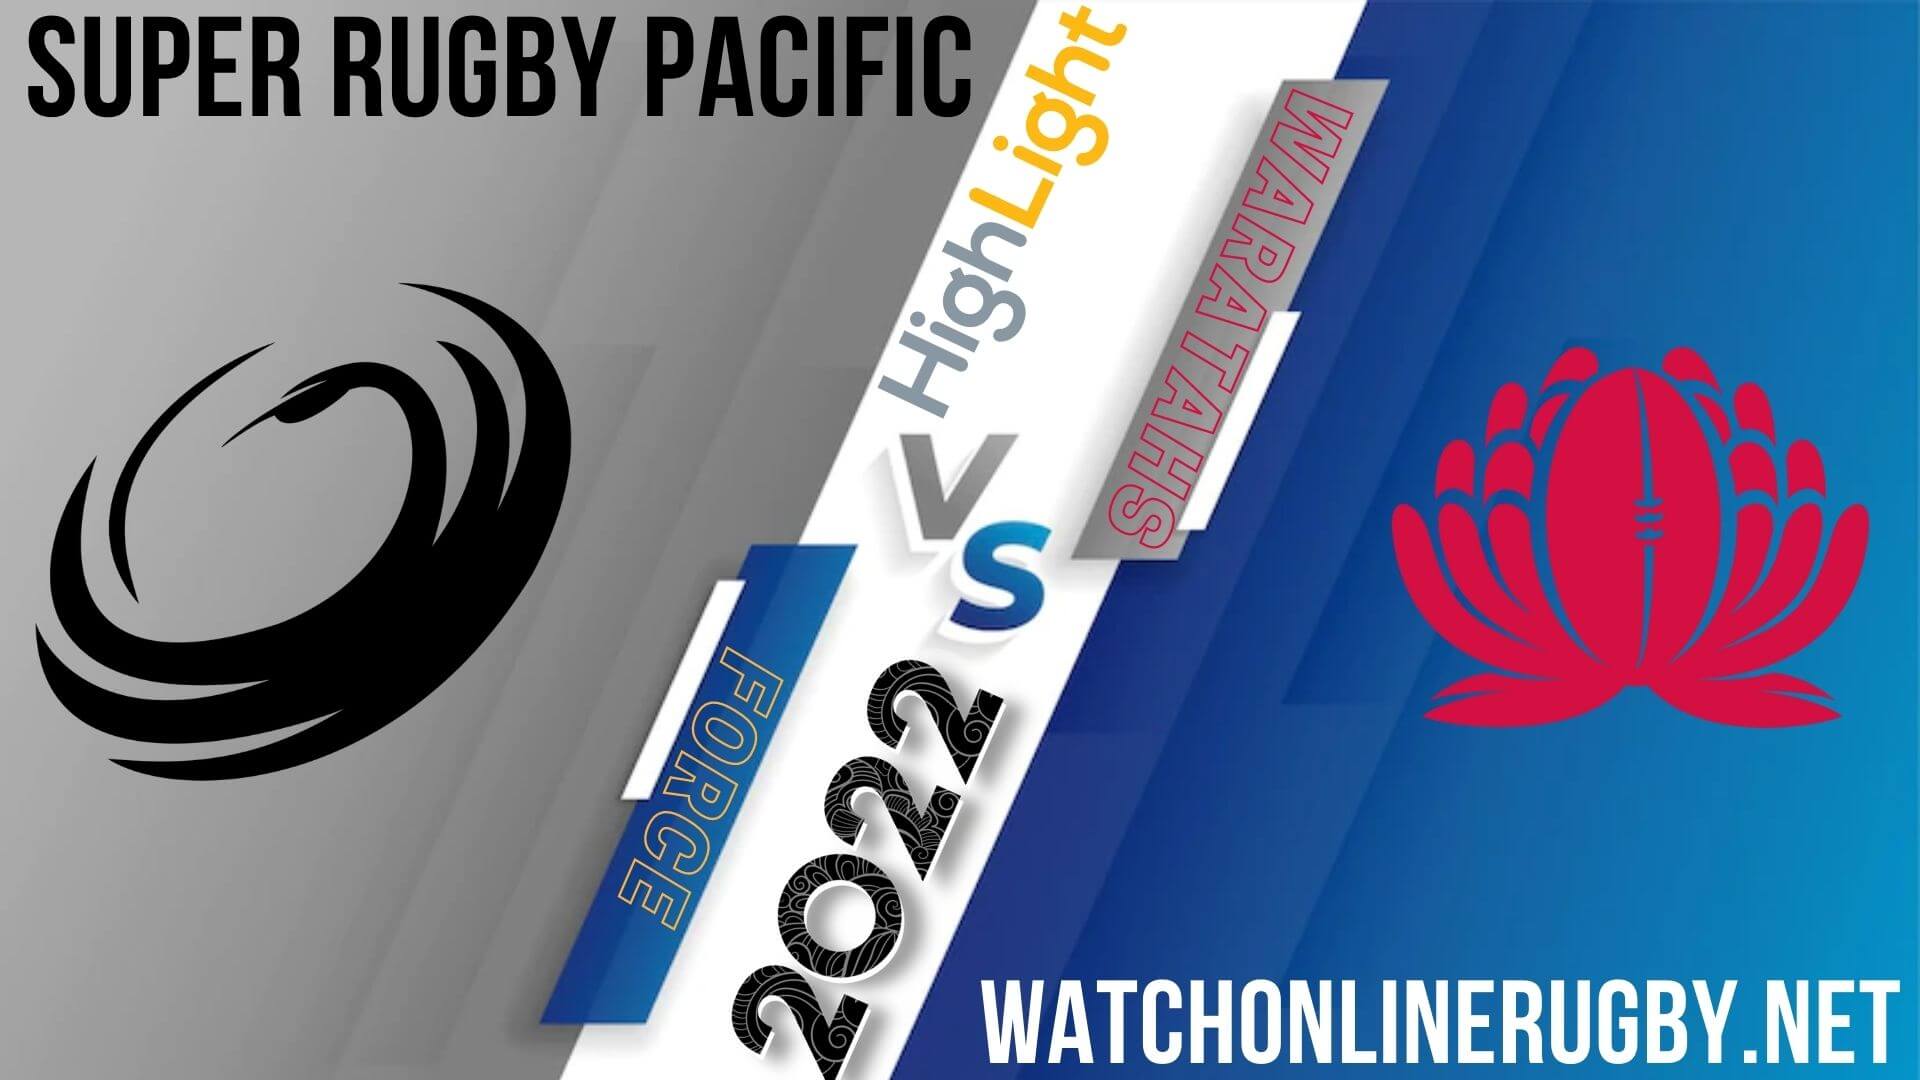 Western Force Vs NSW Waratahs Super Rugby Pacific 2022 RD 9